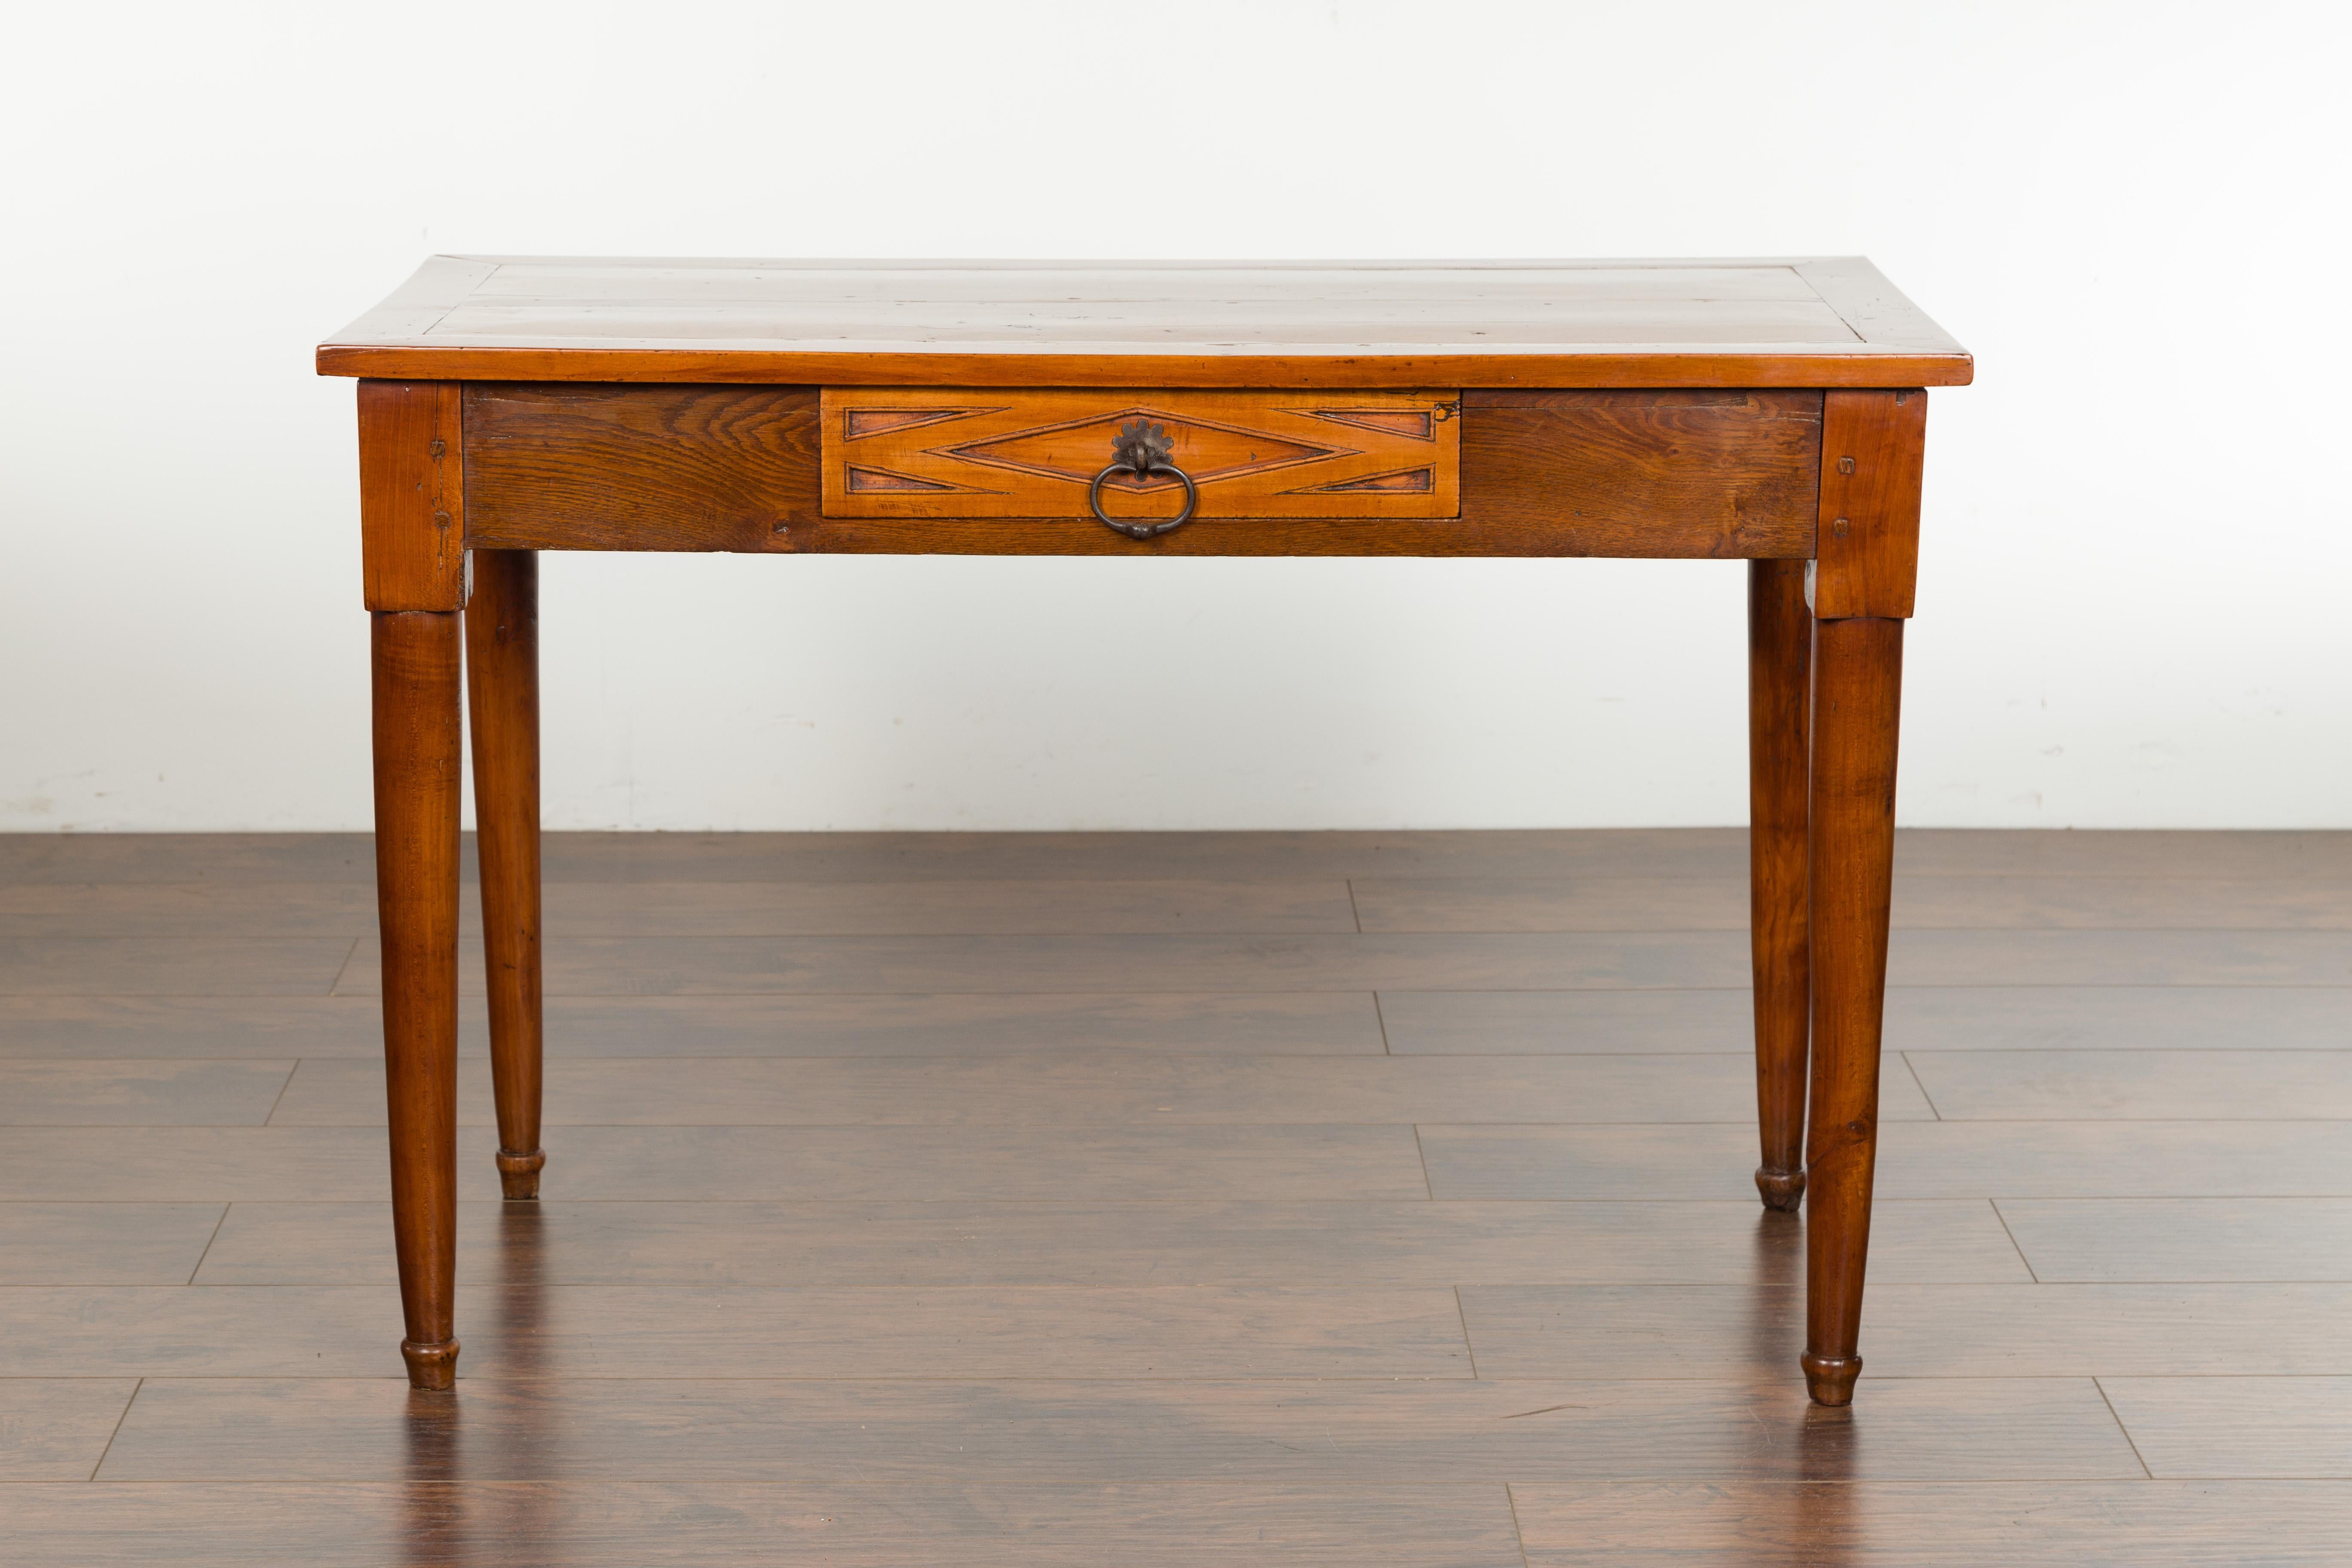 An Italian walnut console table from the 19th century, with single drawer and diamond motif. Created in Italy during the 19th century, this walnut table features a rectangular top sitting above a single dovetailed drawer. Carved in low-relief with